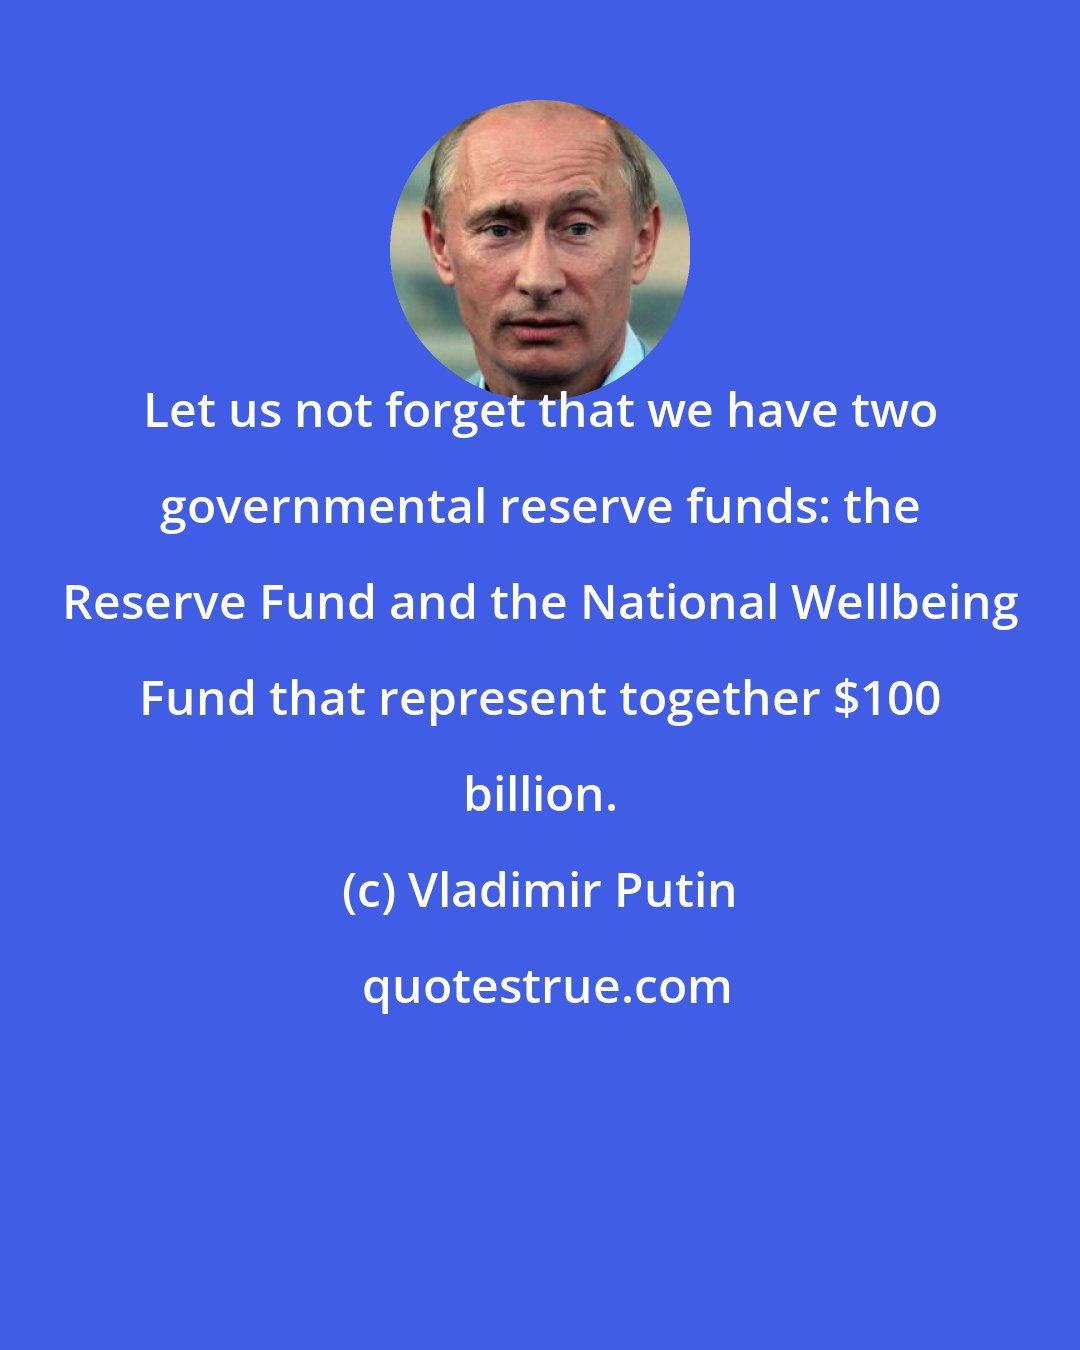 Vladimir Putin: Let us not forget that we have two governmental reserve funds: the Reserve Fund and the National Wellbeing Fund that represent together $100 billion.